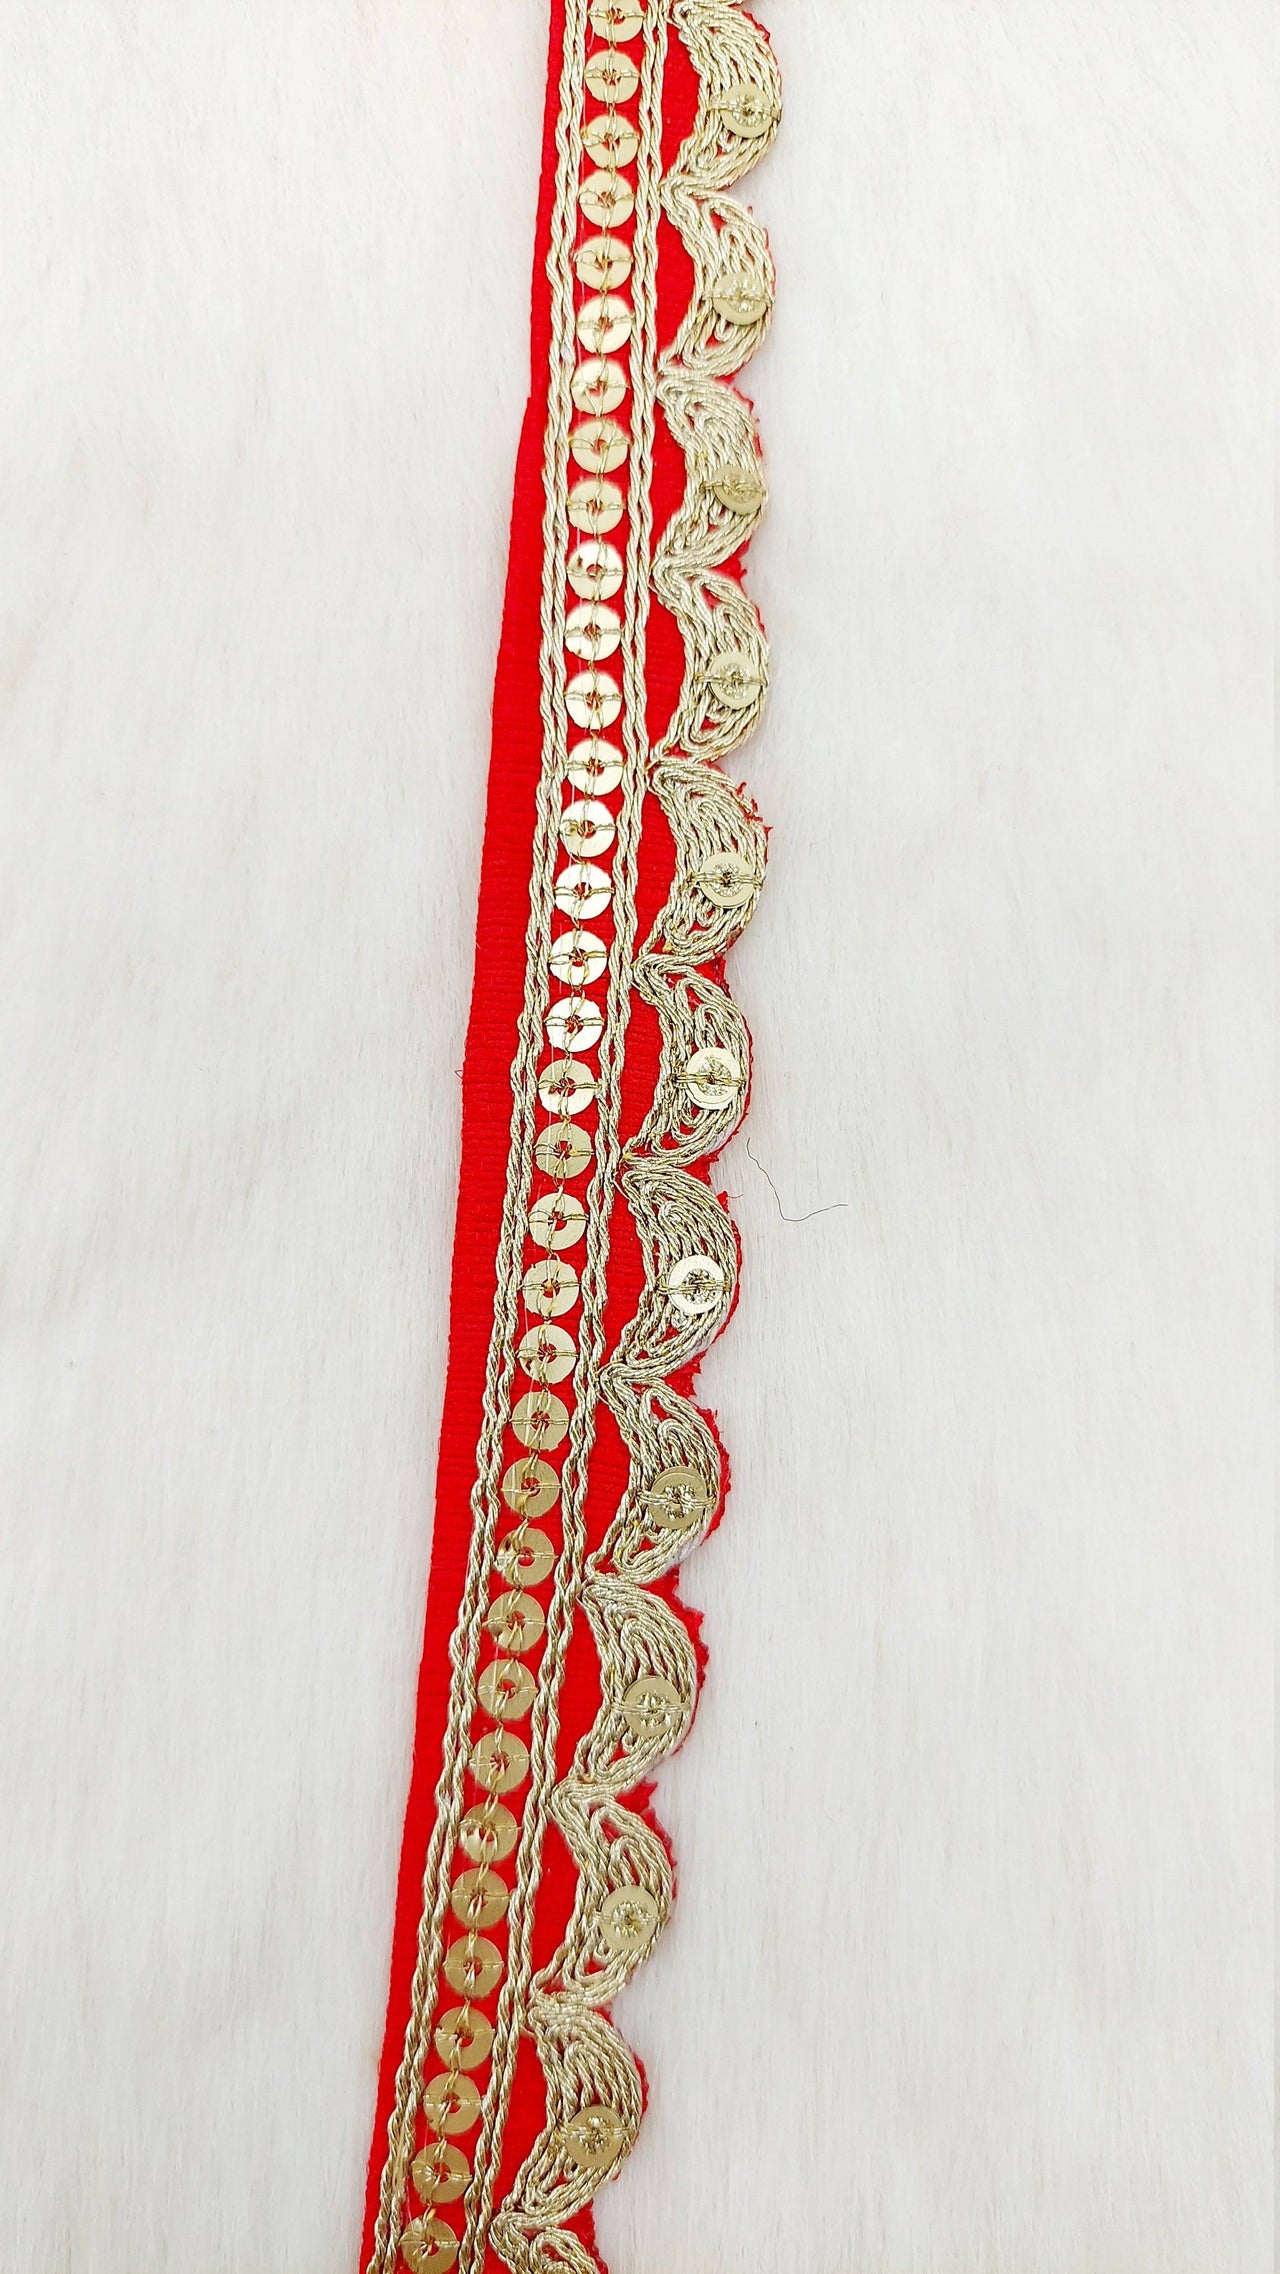 Art Silk Fabric Trim With Gold Embroidery, Scallop Sequins Sari Border, Trim By 3 Yards